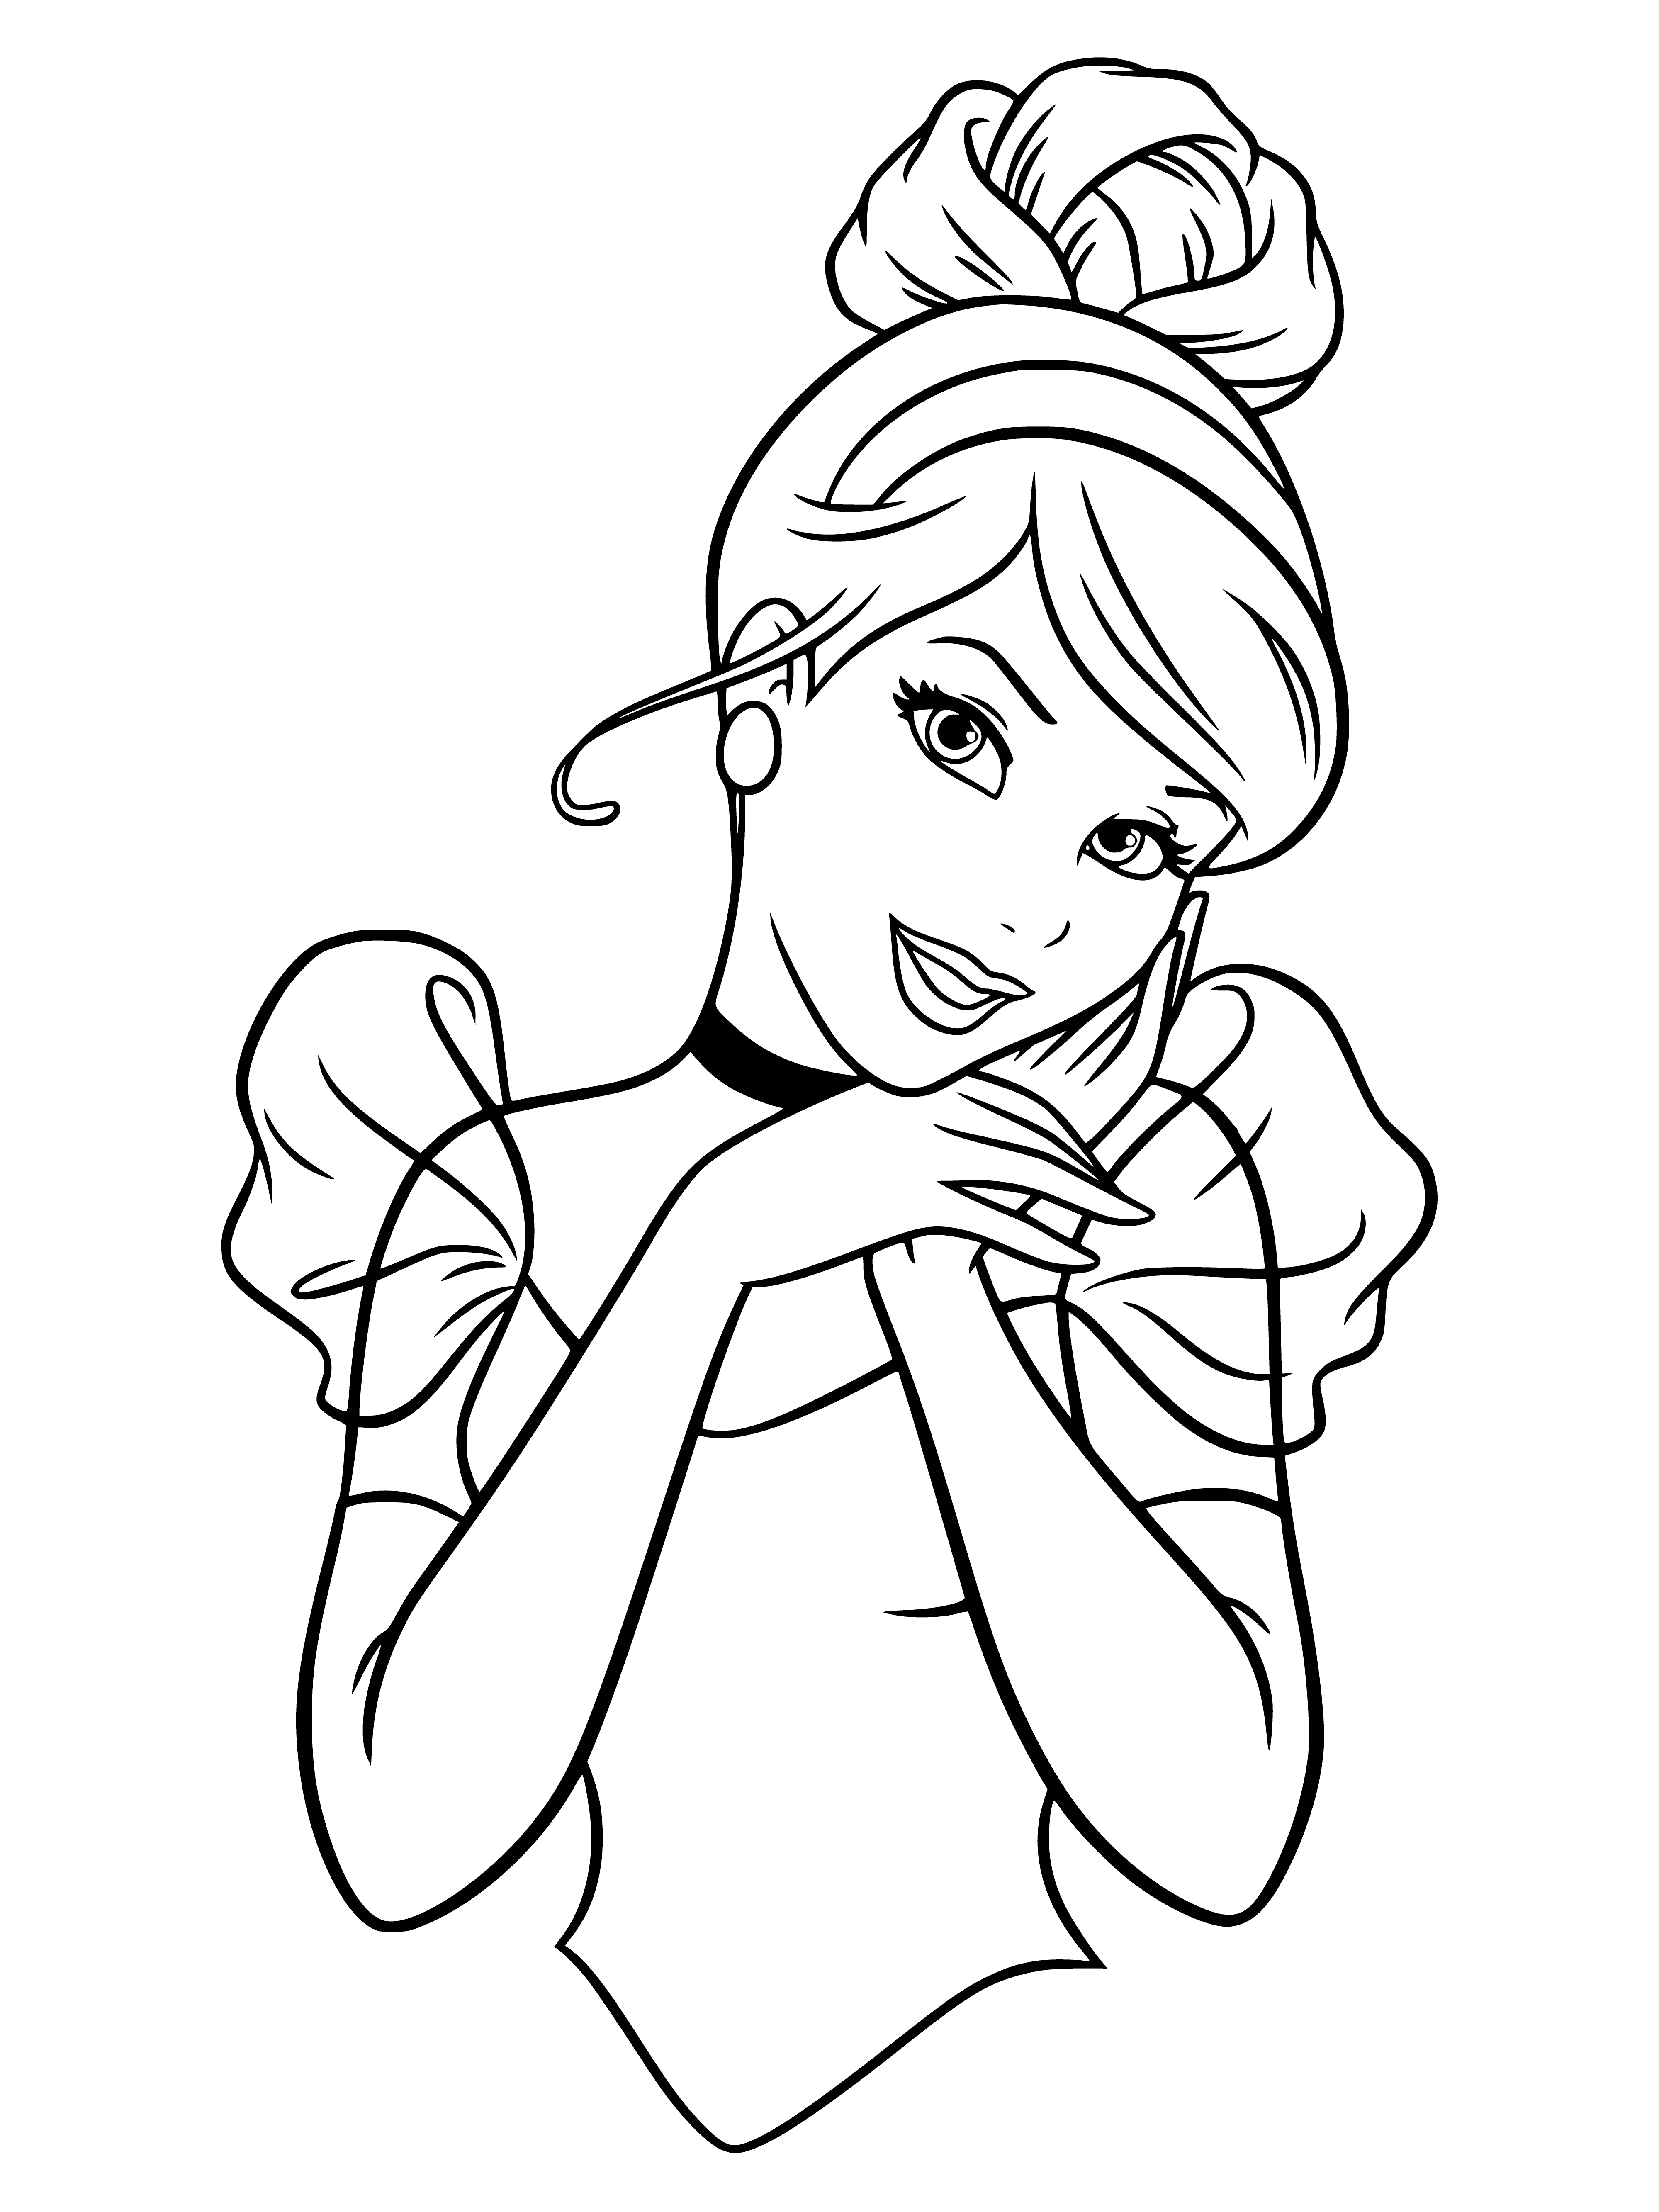 coloring page: Cinderella, smiling and in her blue dress with a ribbon in her hair, stands in front of a castle holding a pumpkin and wand.